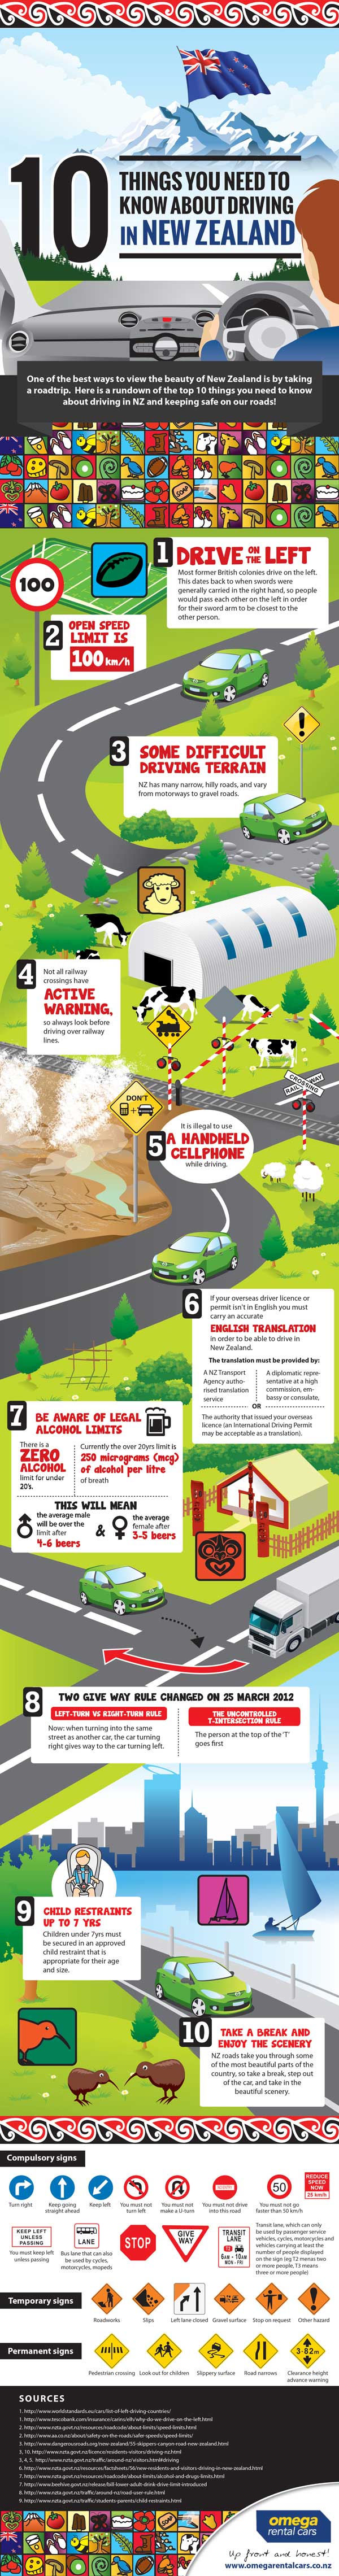 An infographic with tips on safe driving in New Zealand